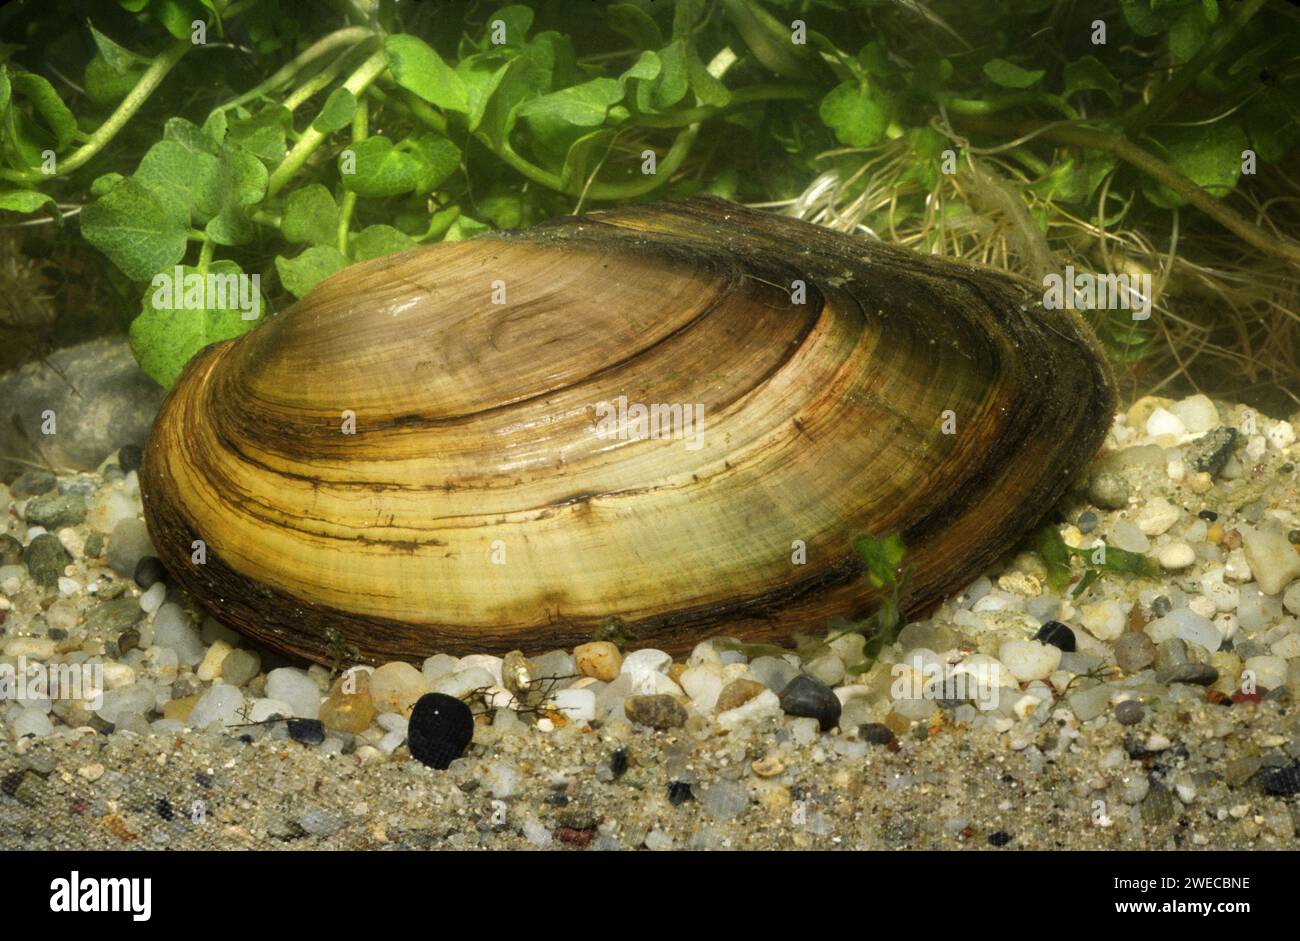 swan mussel (Anodonta cygnea), at the bottom of the pond, Germany Stock Photo